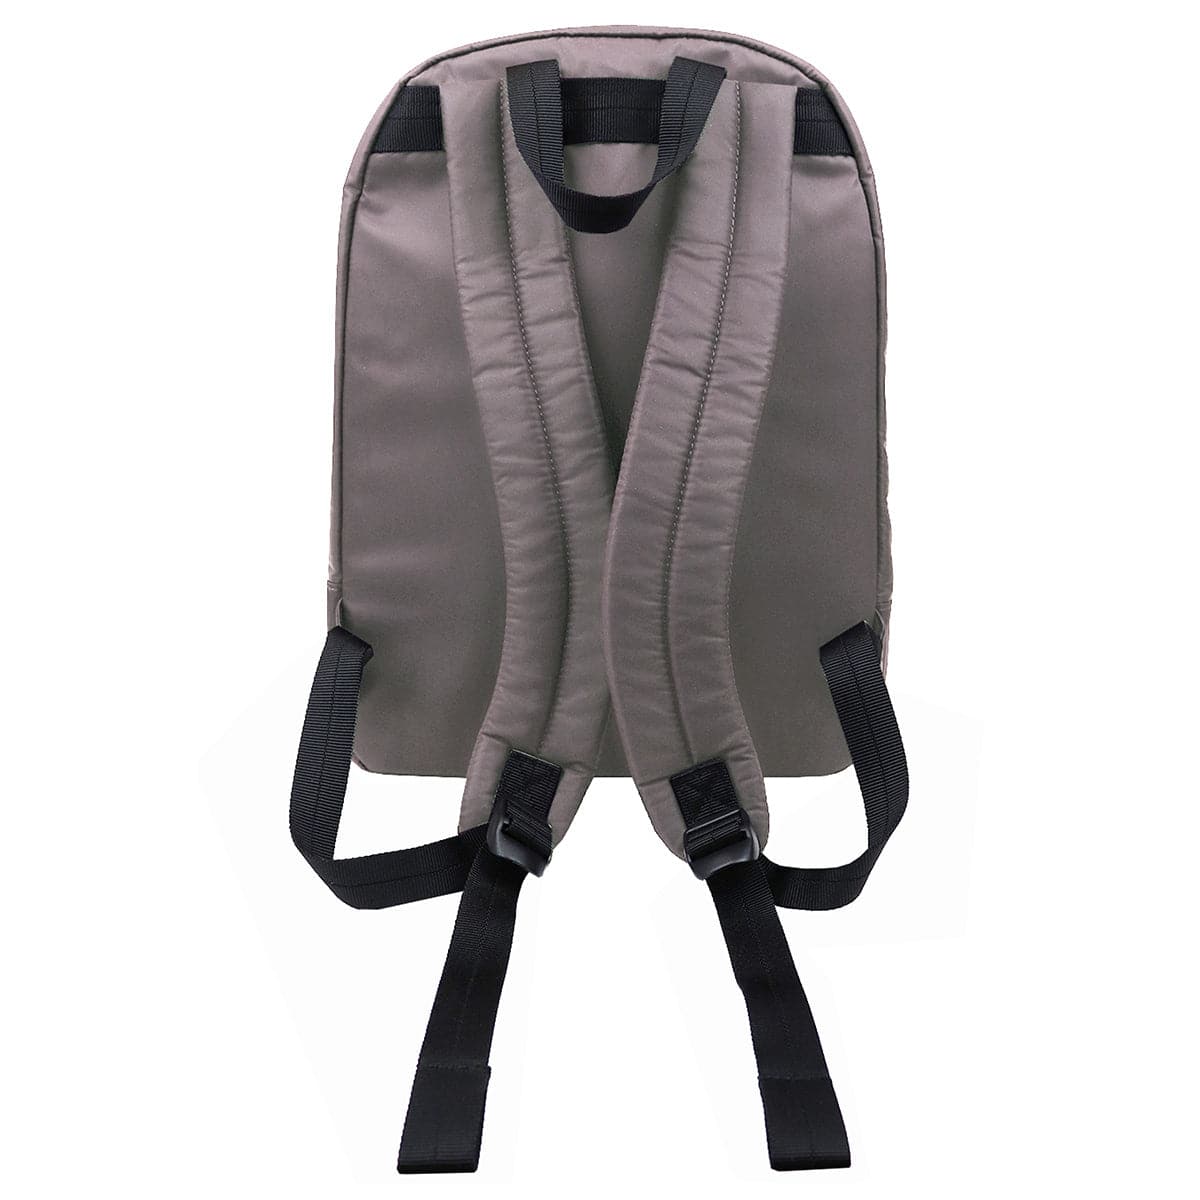 Hedgren Scoot Sustainably Made 13" Laptop Backpack